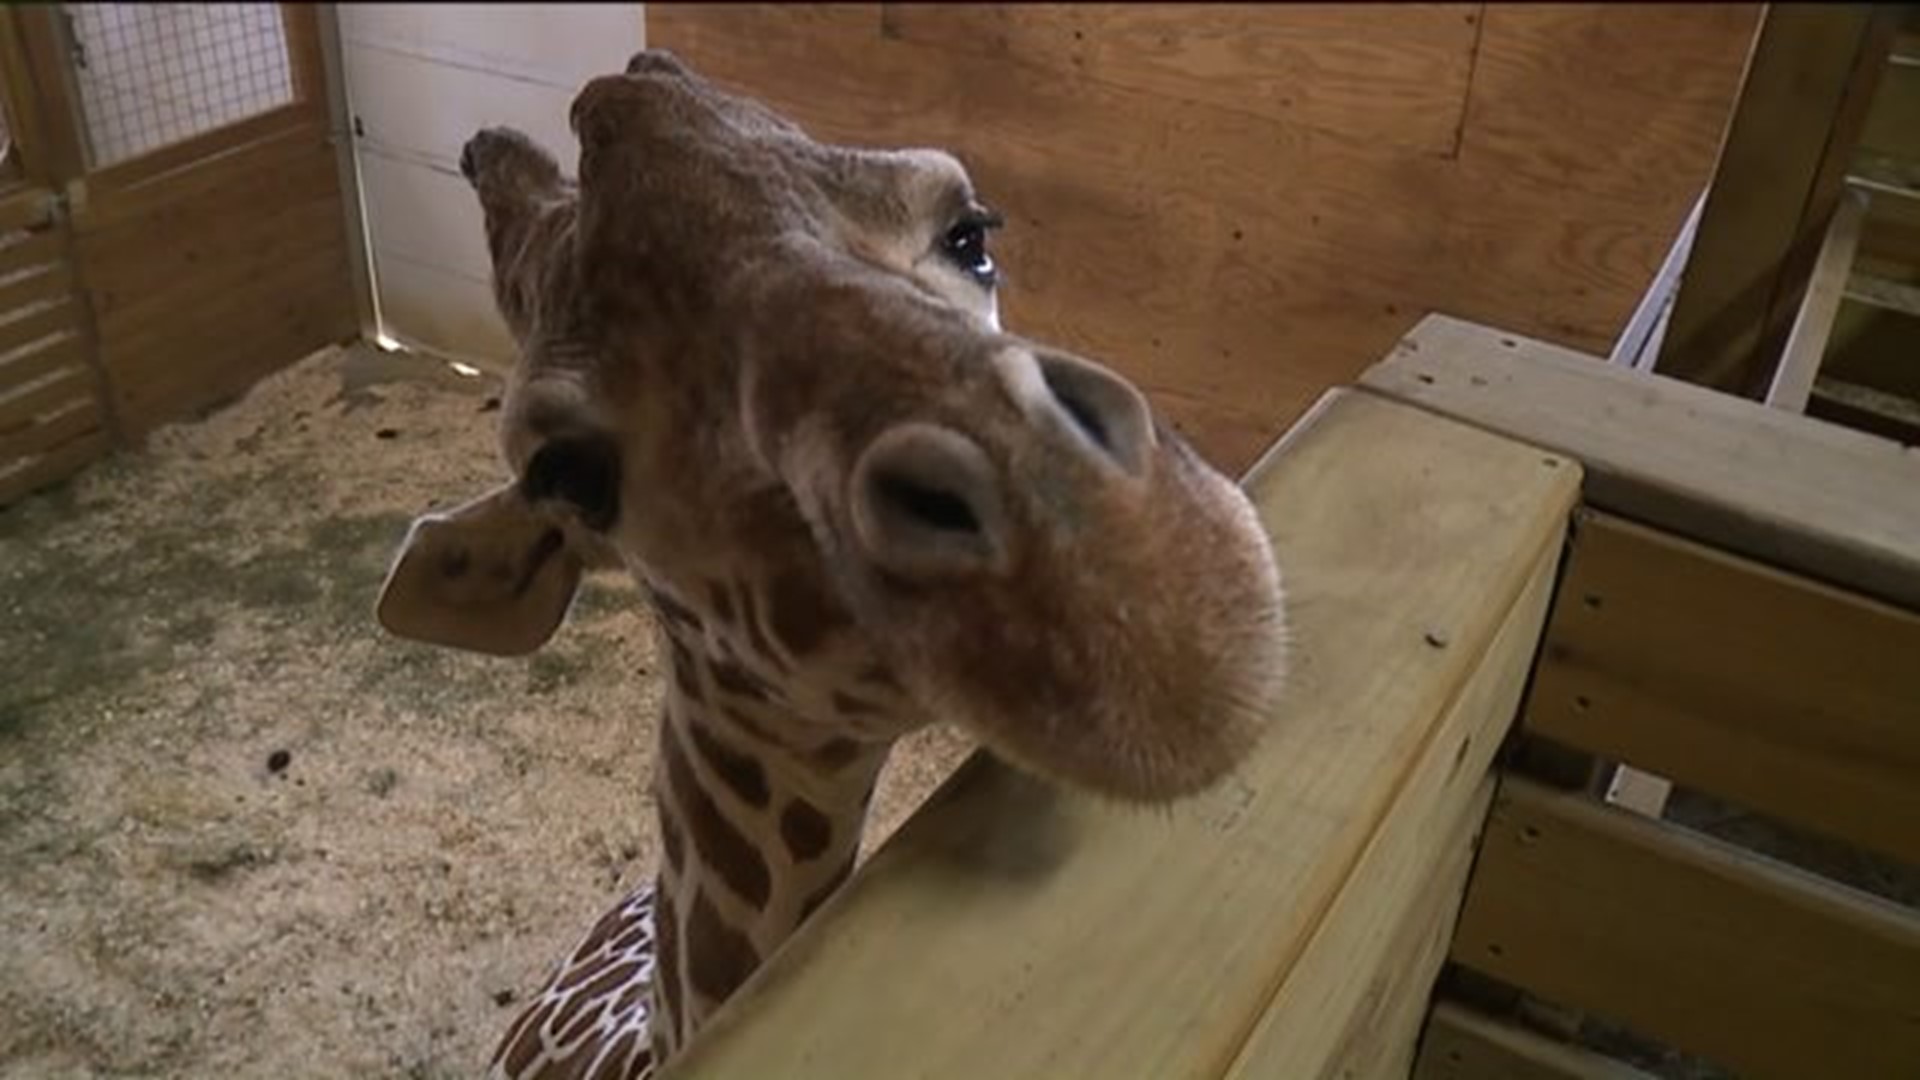 Live Streaming Video Of Expectant Giraffe Goes Viral